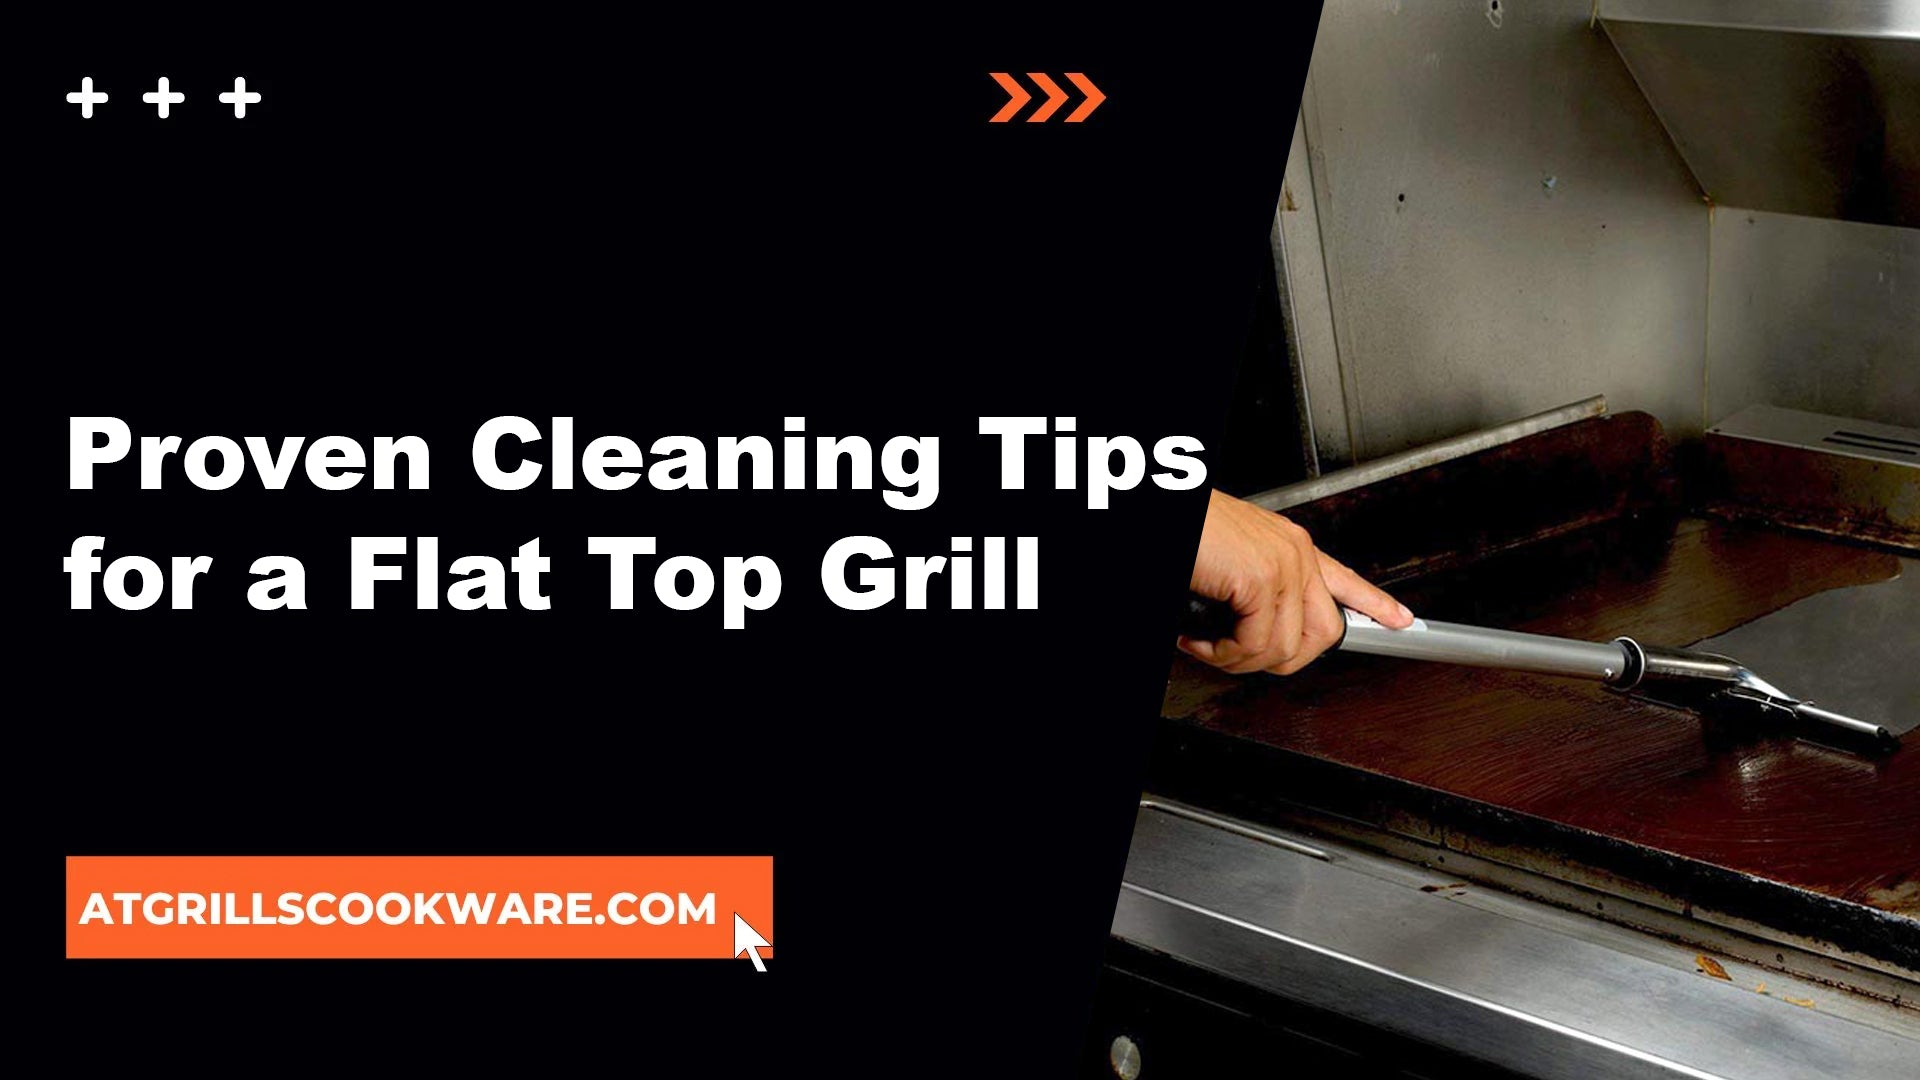 Proven Cleaning Tips for a Flat Top Grill